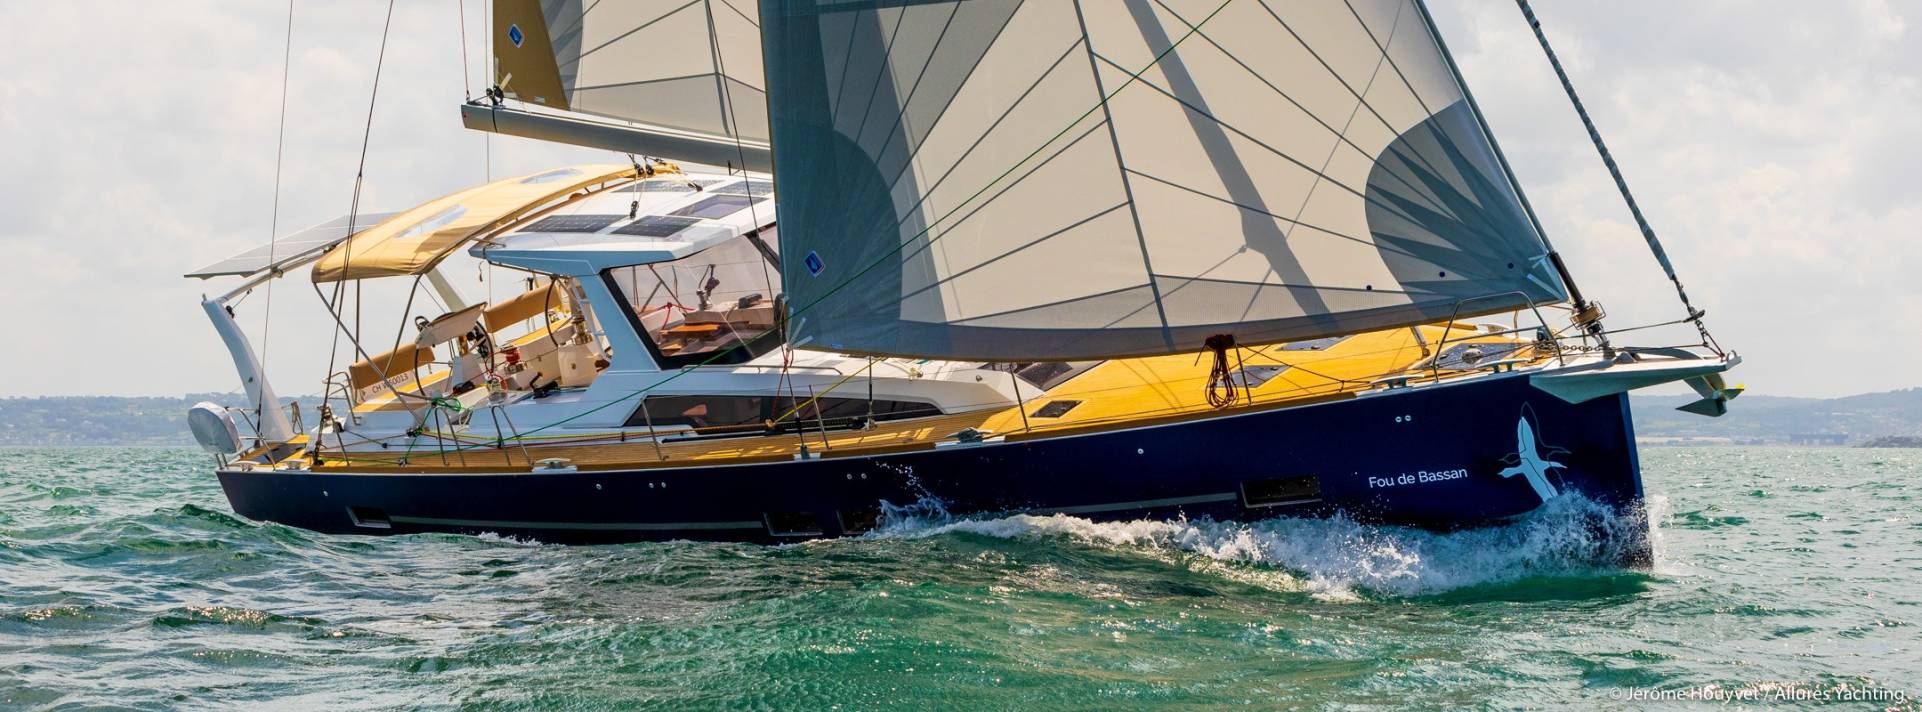 grande large yachting